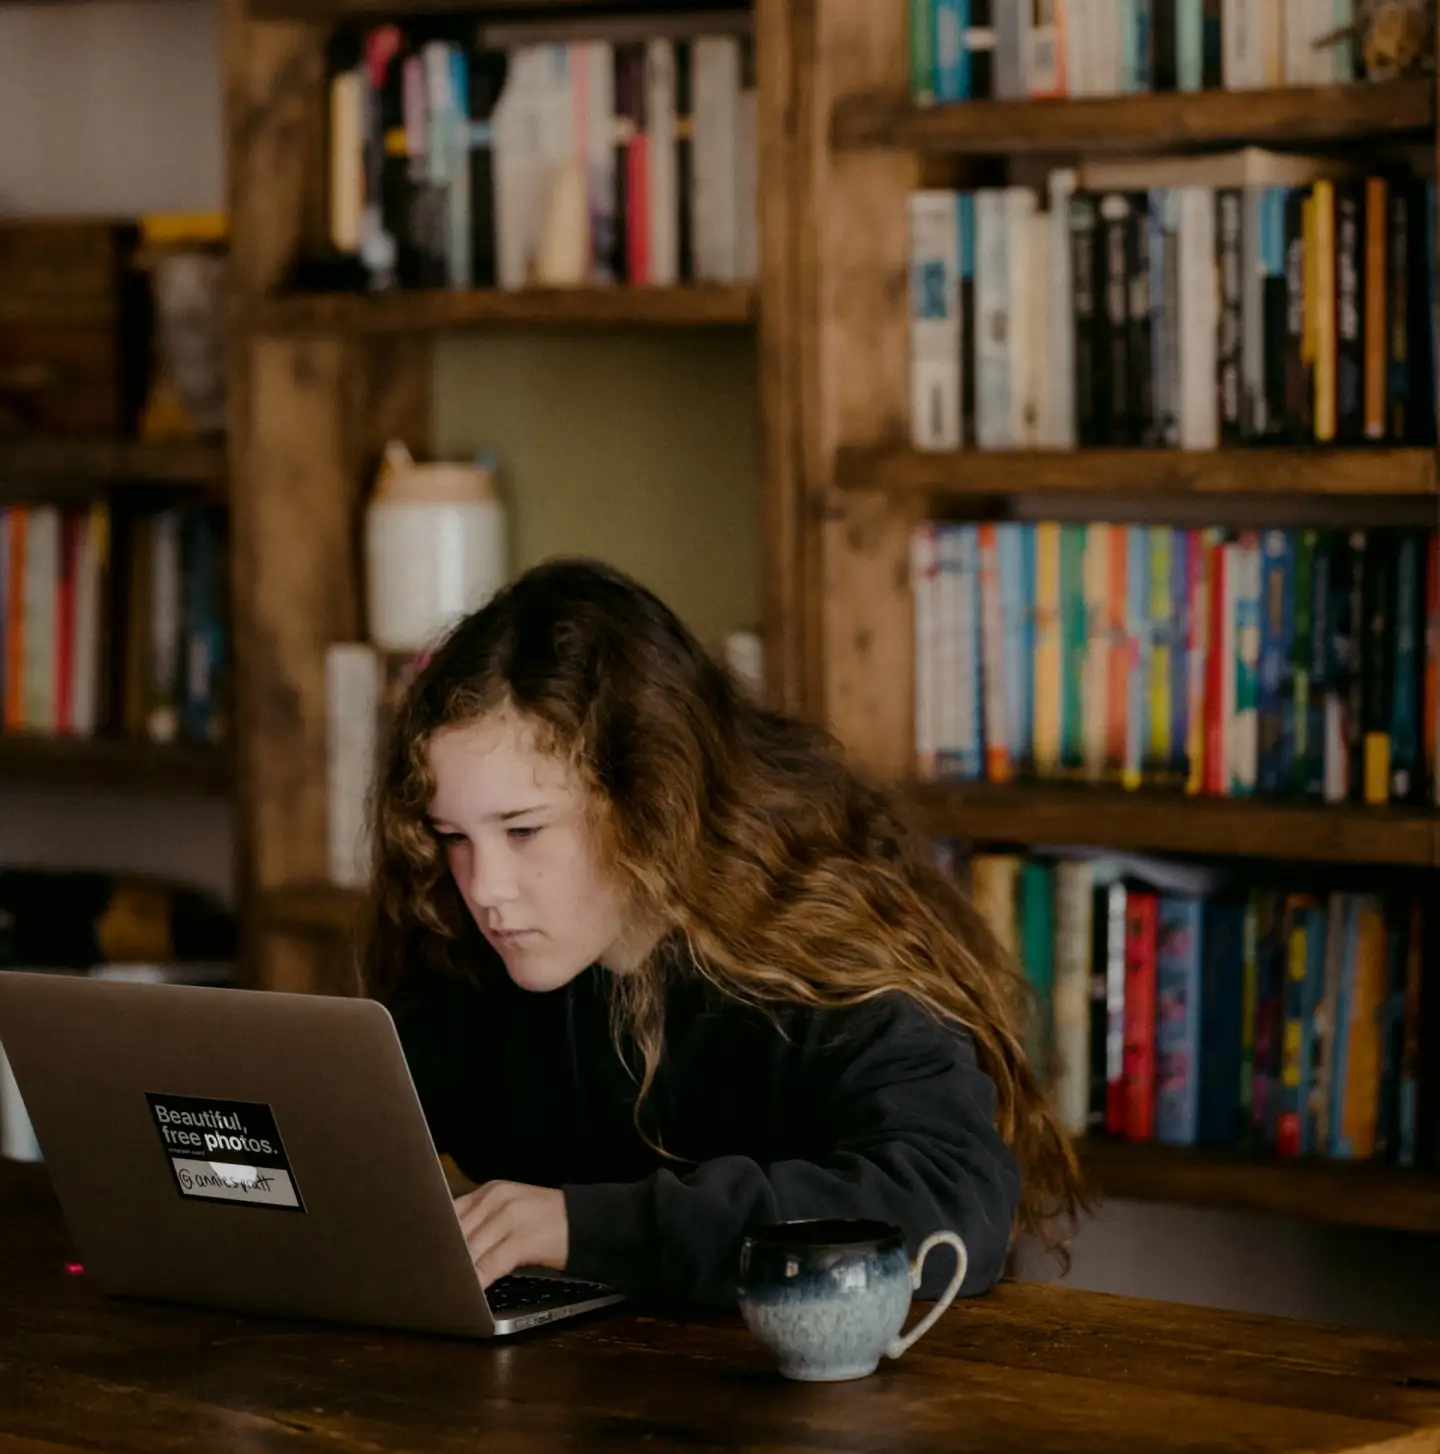 A young girl working on laptop at a book cafe